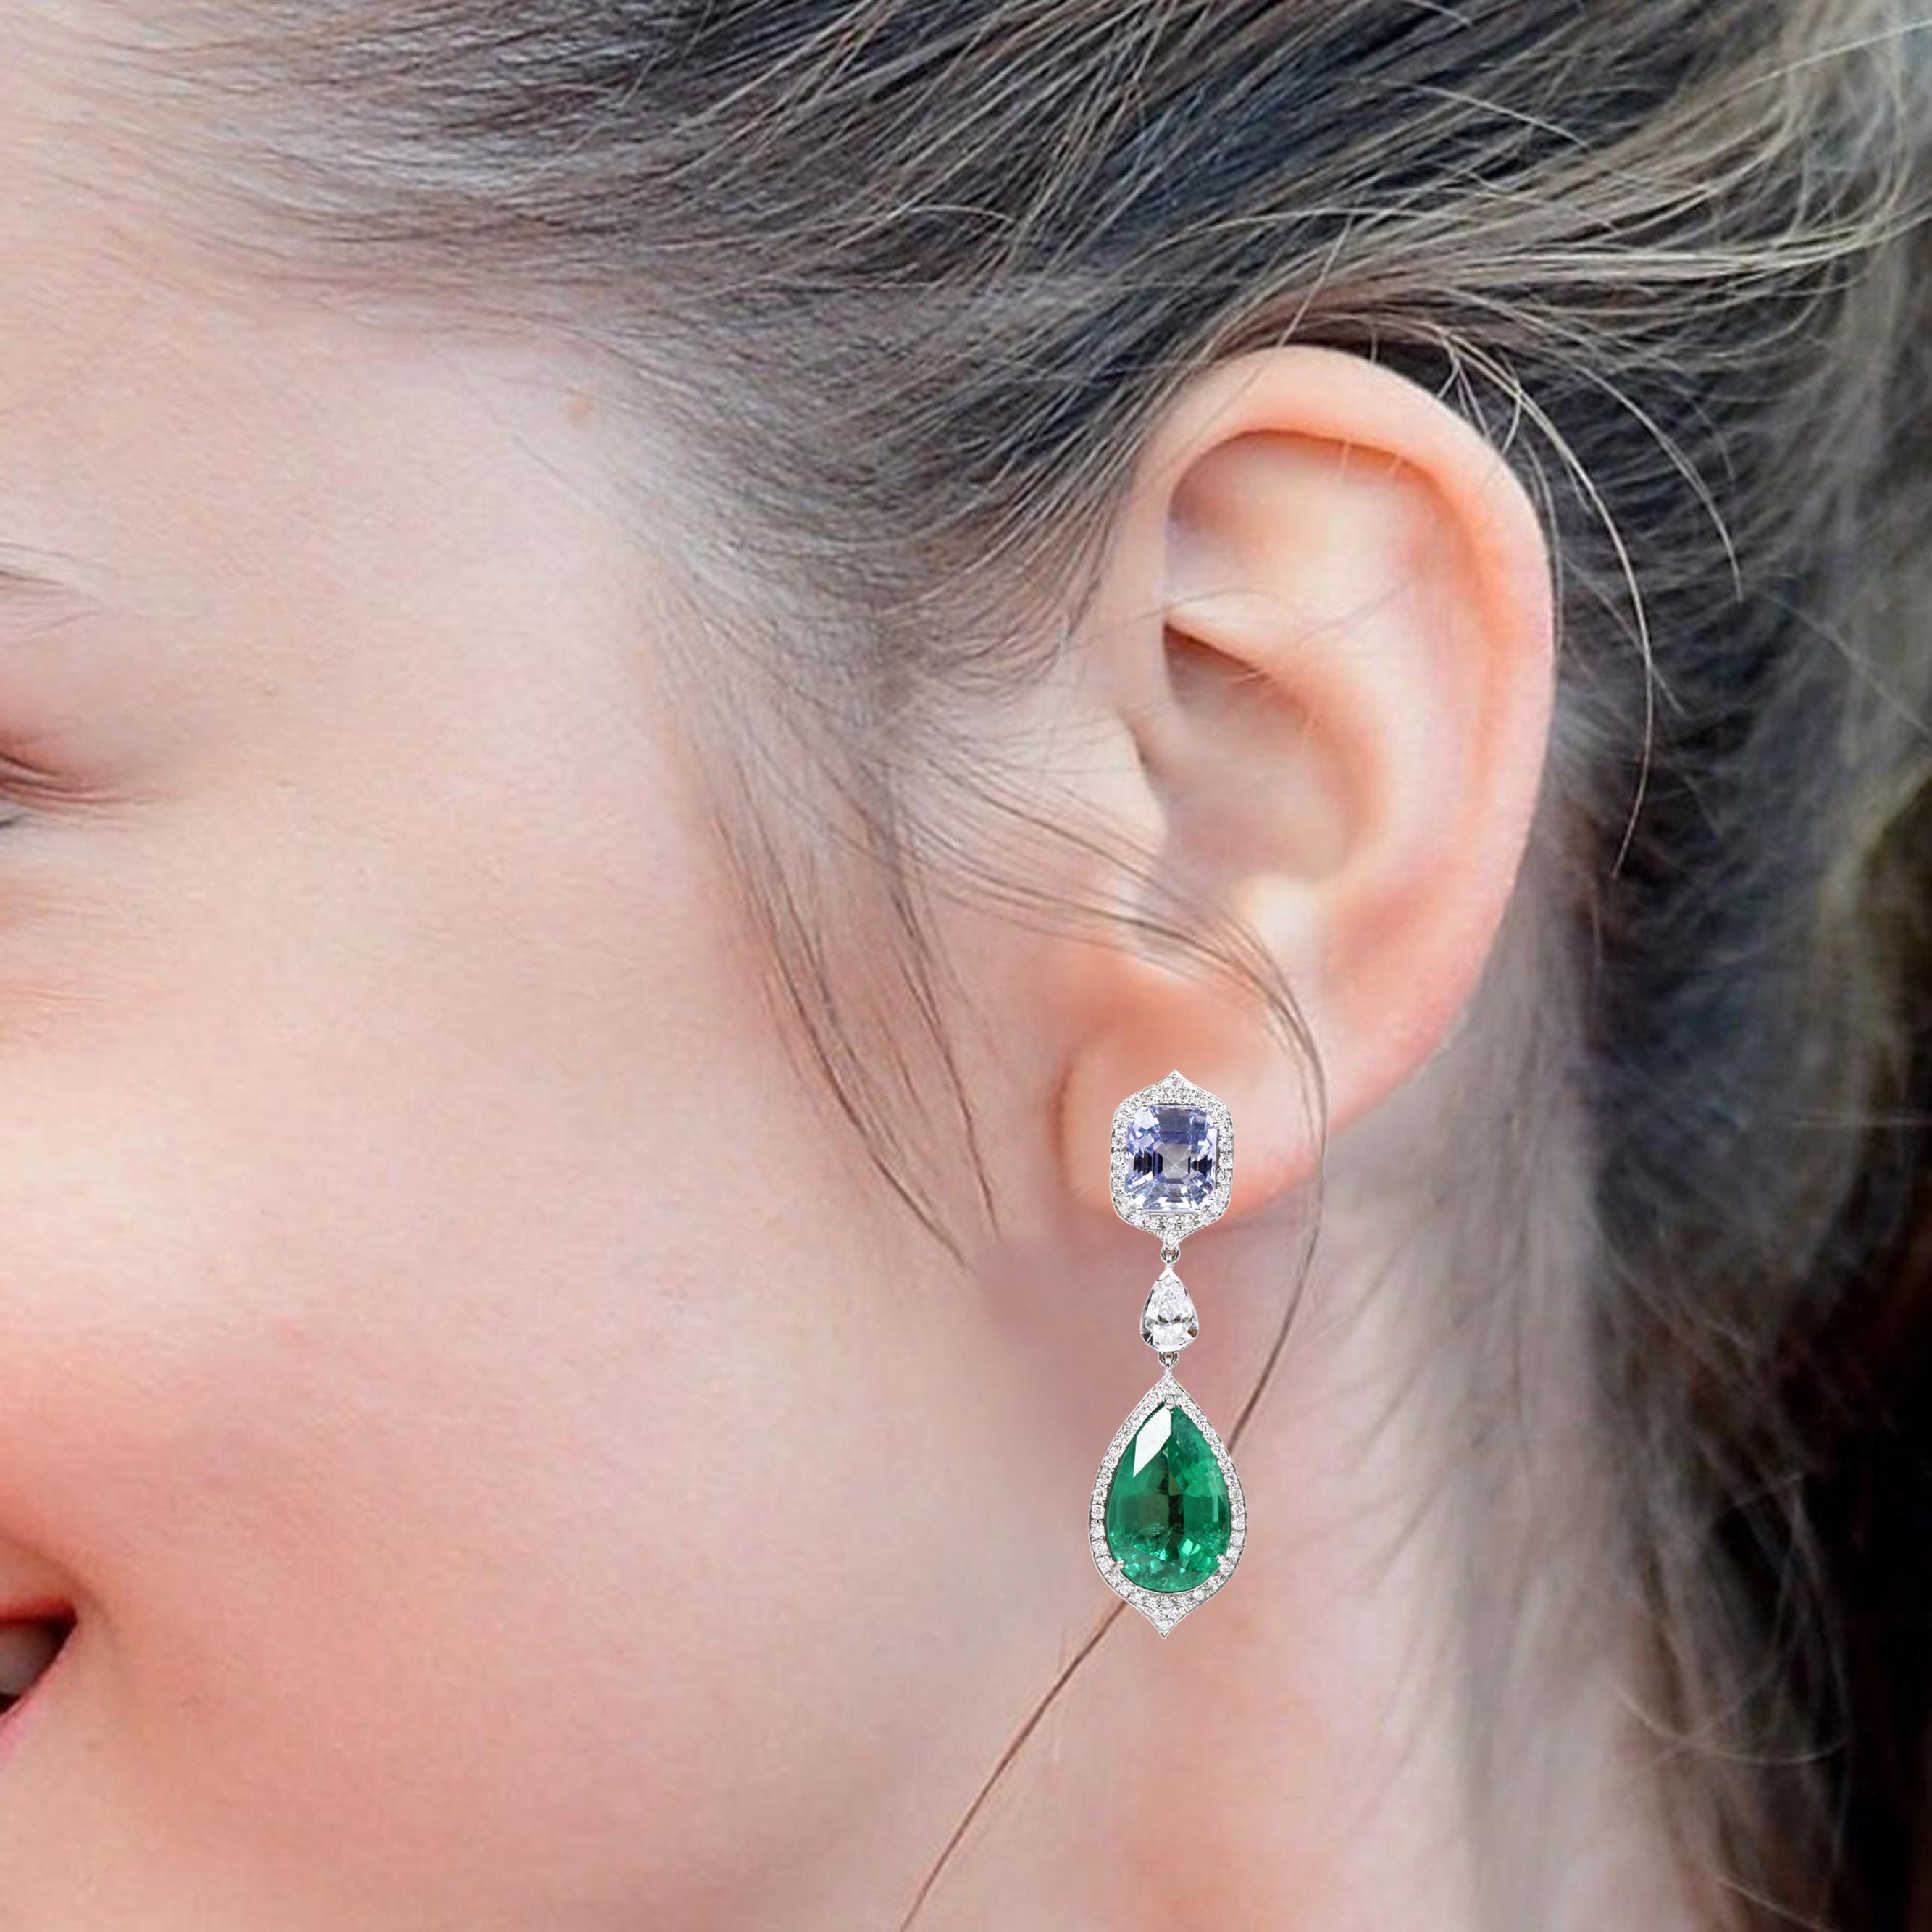 18 Karat White Gold 25.52 Carats Natural Emerald, Sapphire and Diamond Drop Earrings

The epitome of elegance, this striking pair of drop earrings exudes a timeless and stunning aura. The impeccable cushion-shaped Sapphire is surrounded by a single